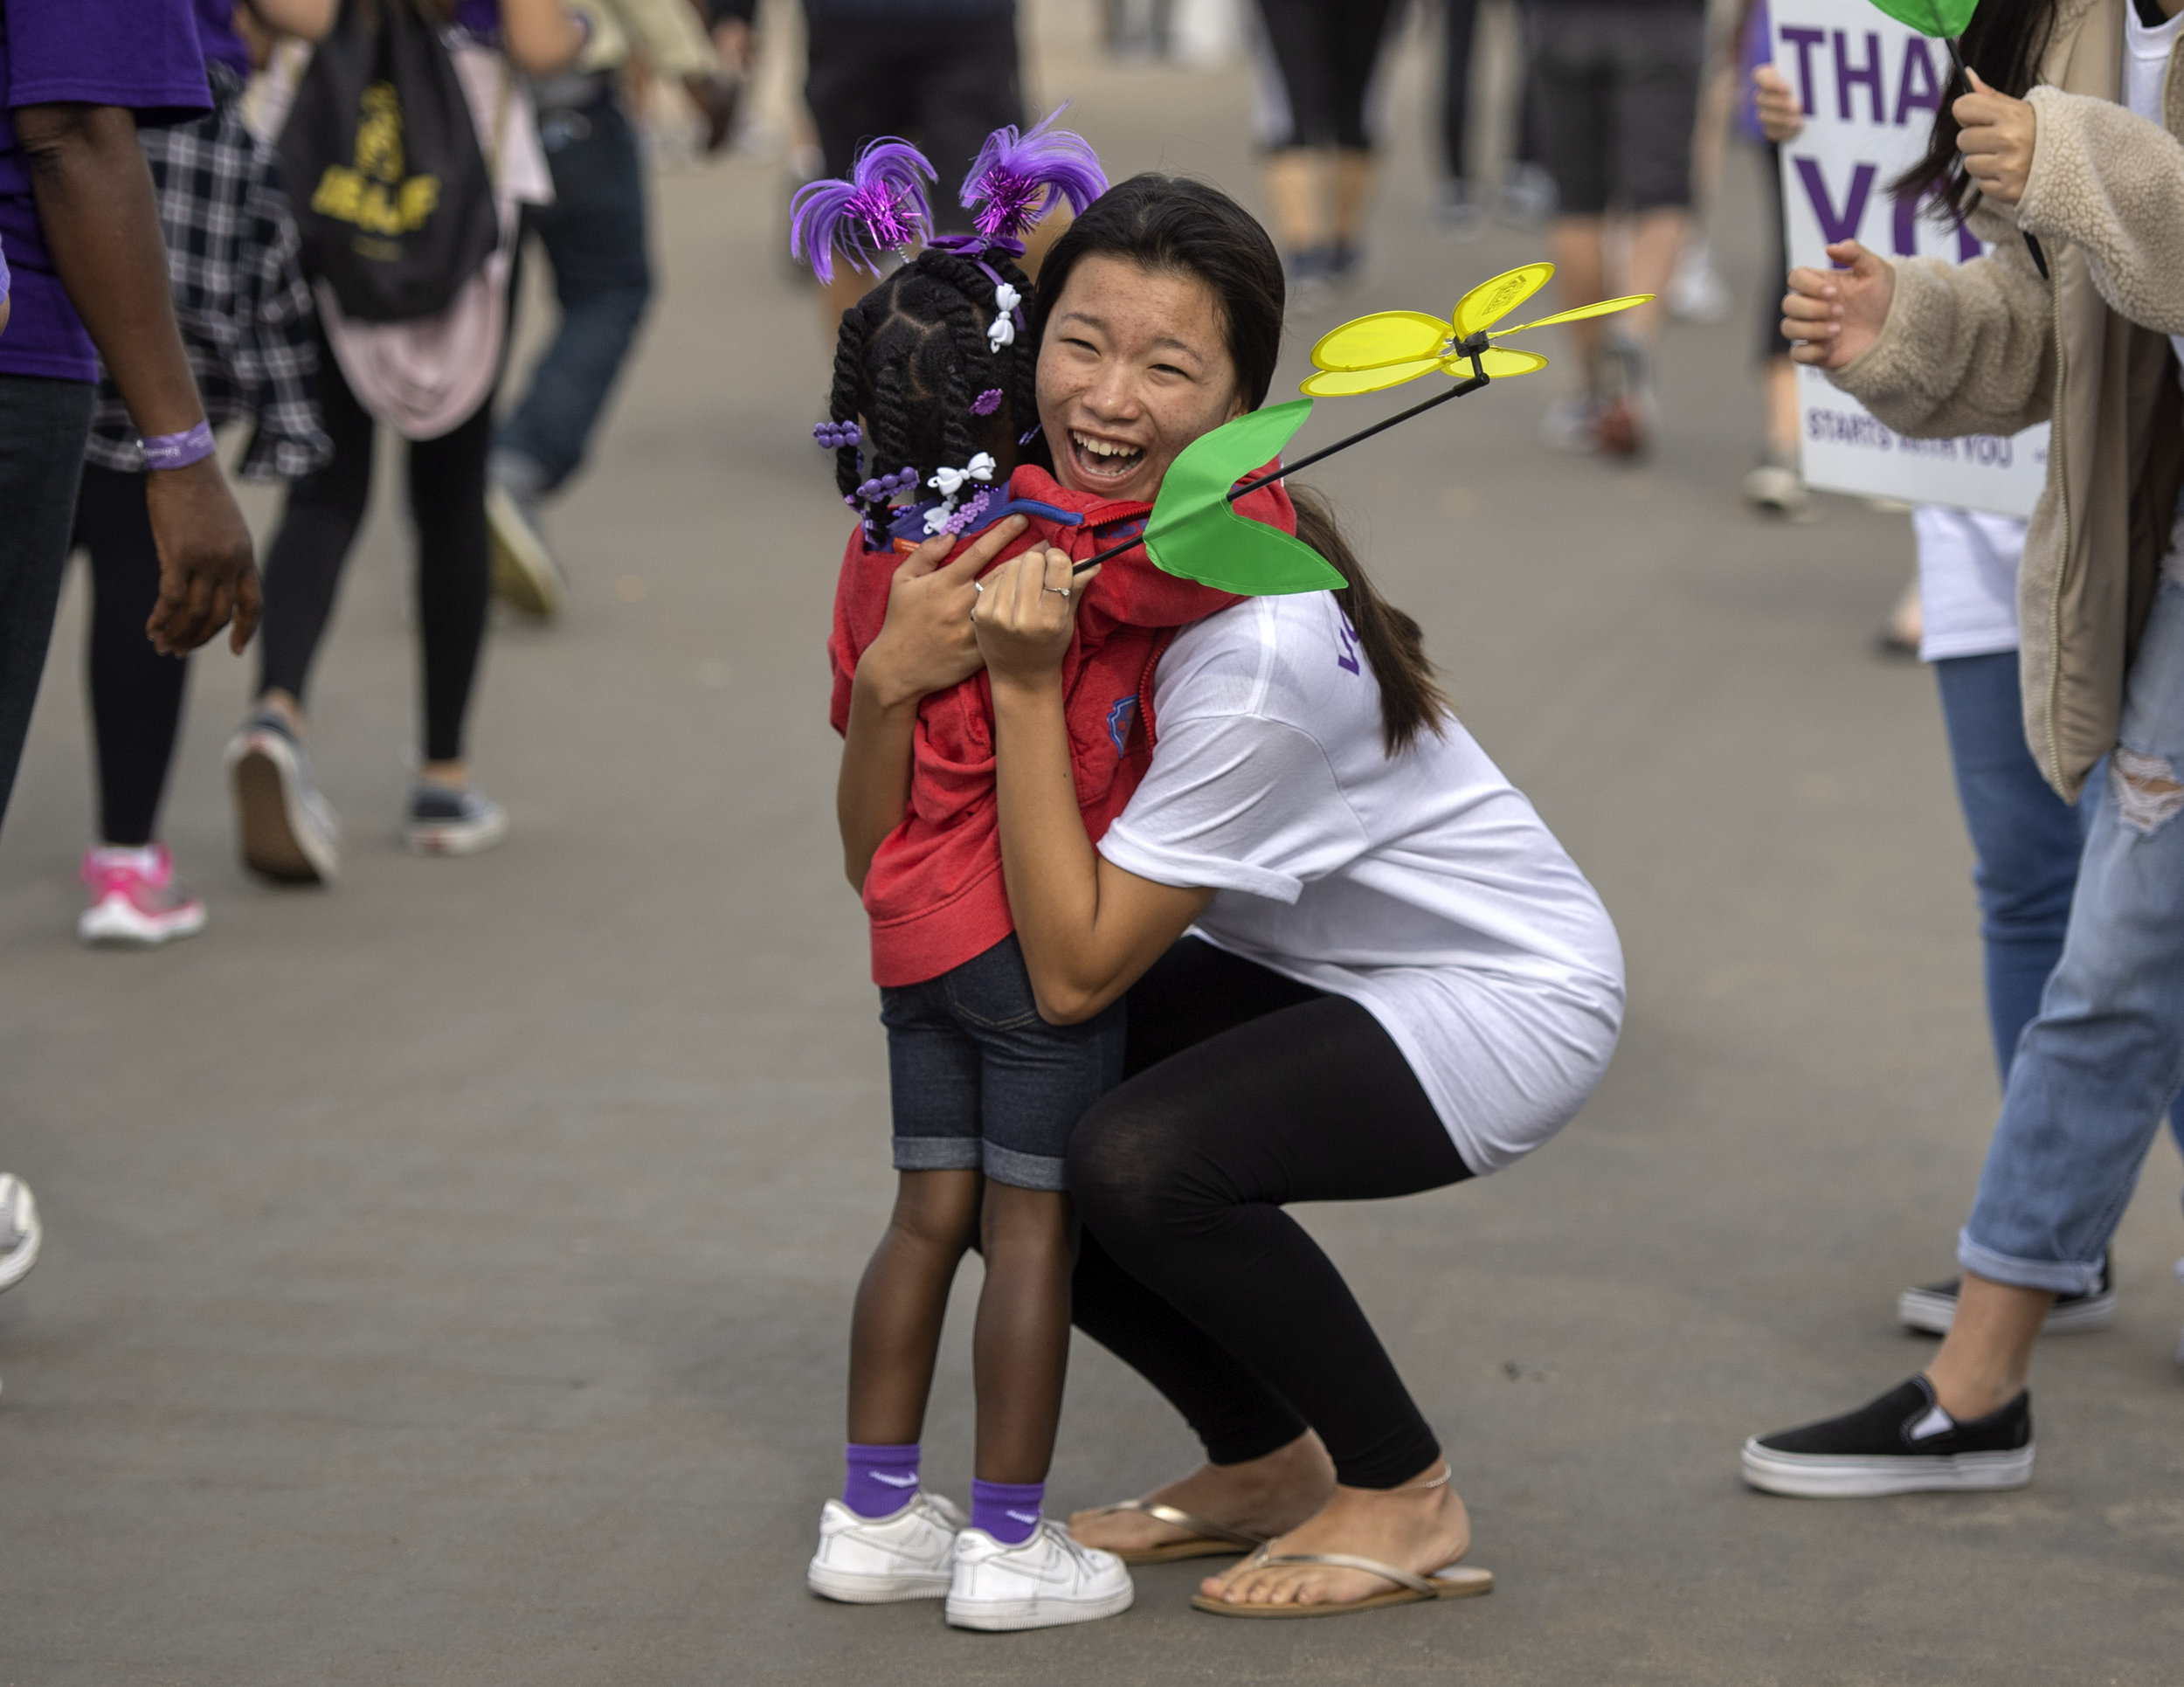  Bolsa Grande High School volunteer Ivy Pham, 16, gets a impromptu hug from 4-year-old Genesis Thomas while cheering her on during the Walk to End Alzheimer's in Huntington Beach on Saturday, October 6, 2018. (Photo by Mindy Schauer, Orange County Re